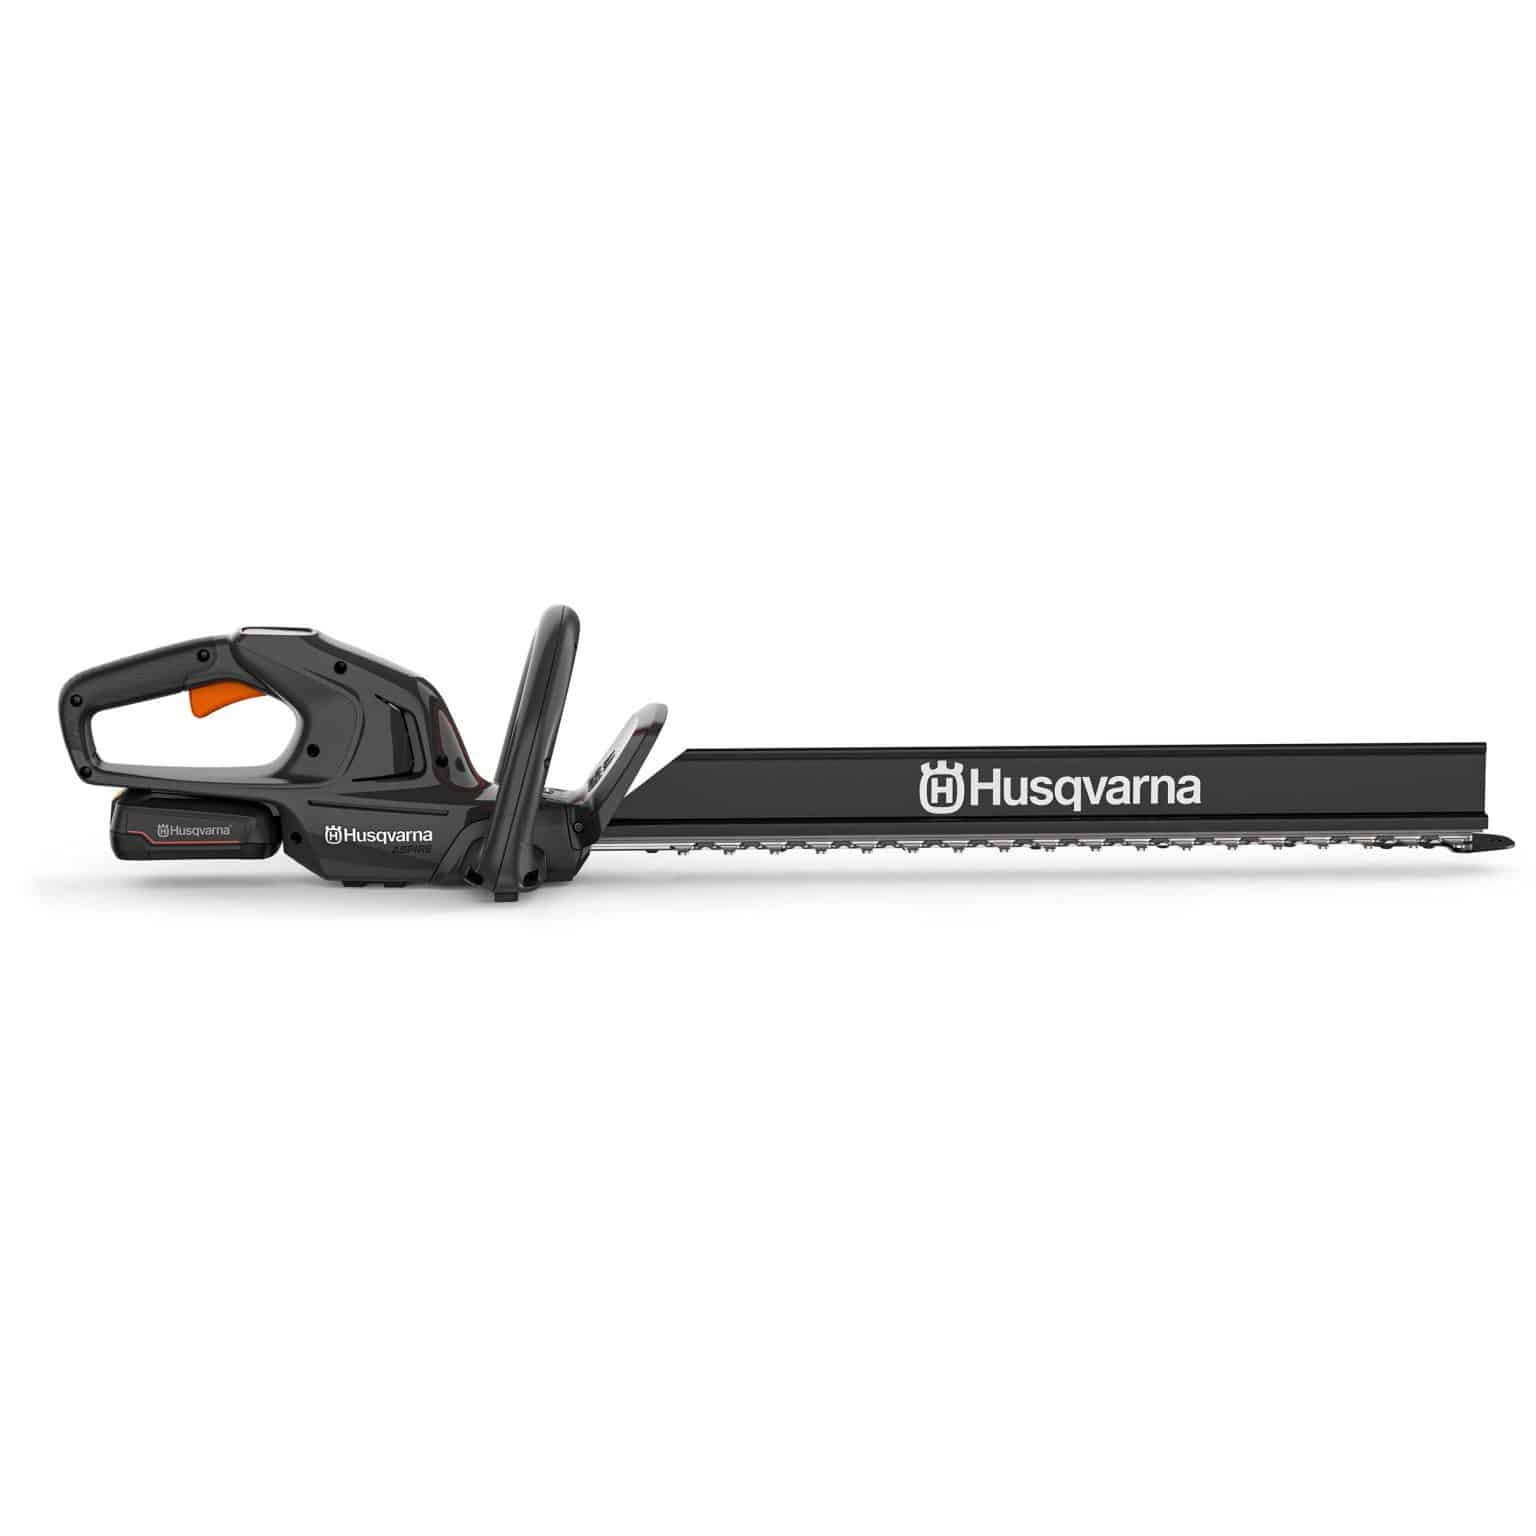 Hedgetrimmer H50-P4A cordless hedge trimmer